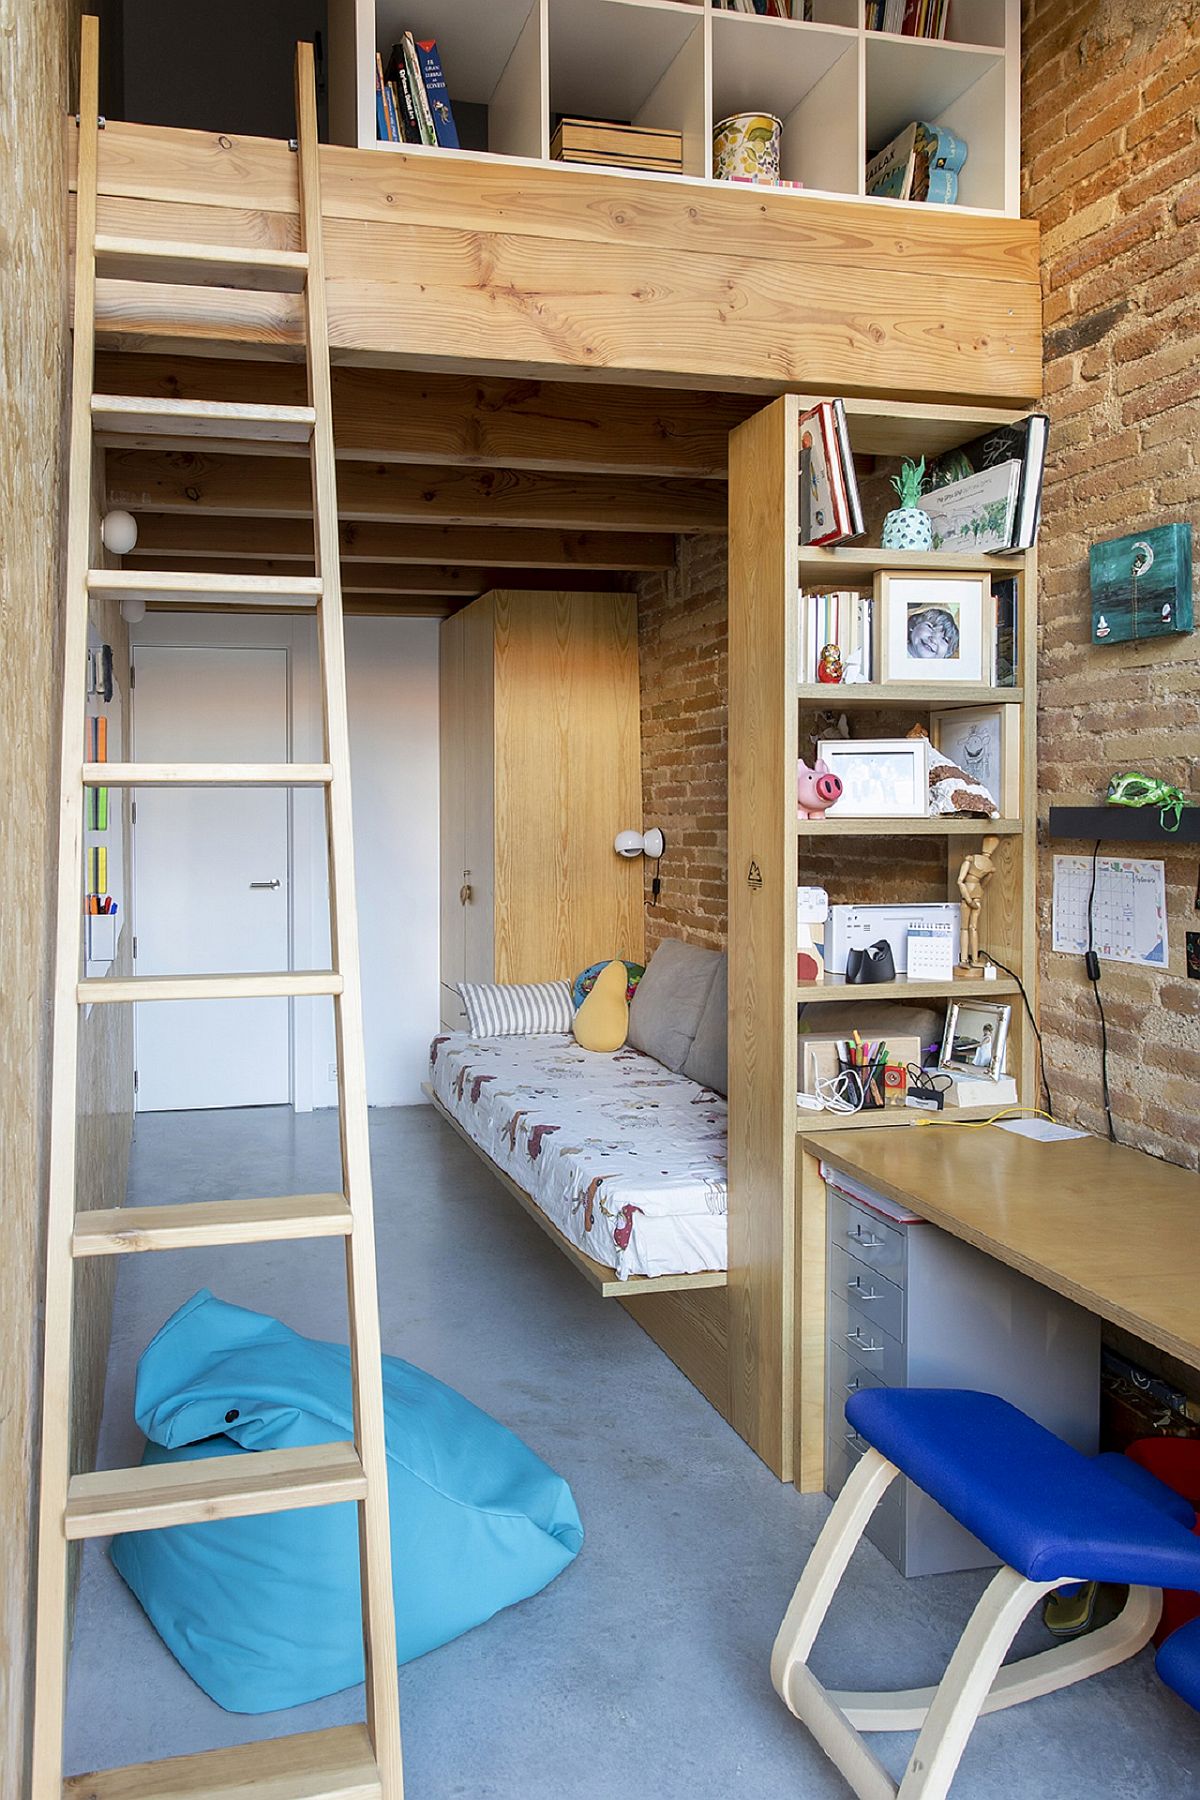 Tiny-bedroom-with-loft-level-makes-smart-use-of-limited-space-93591